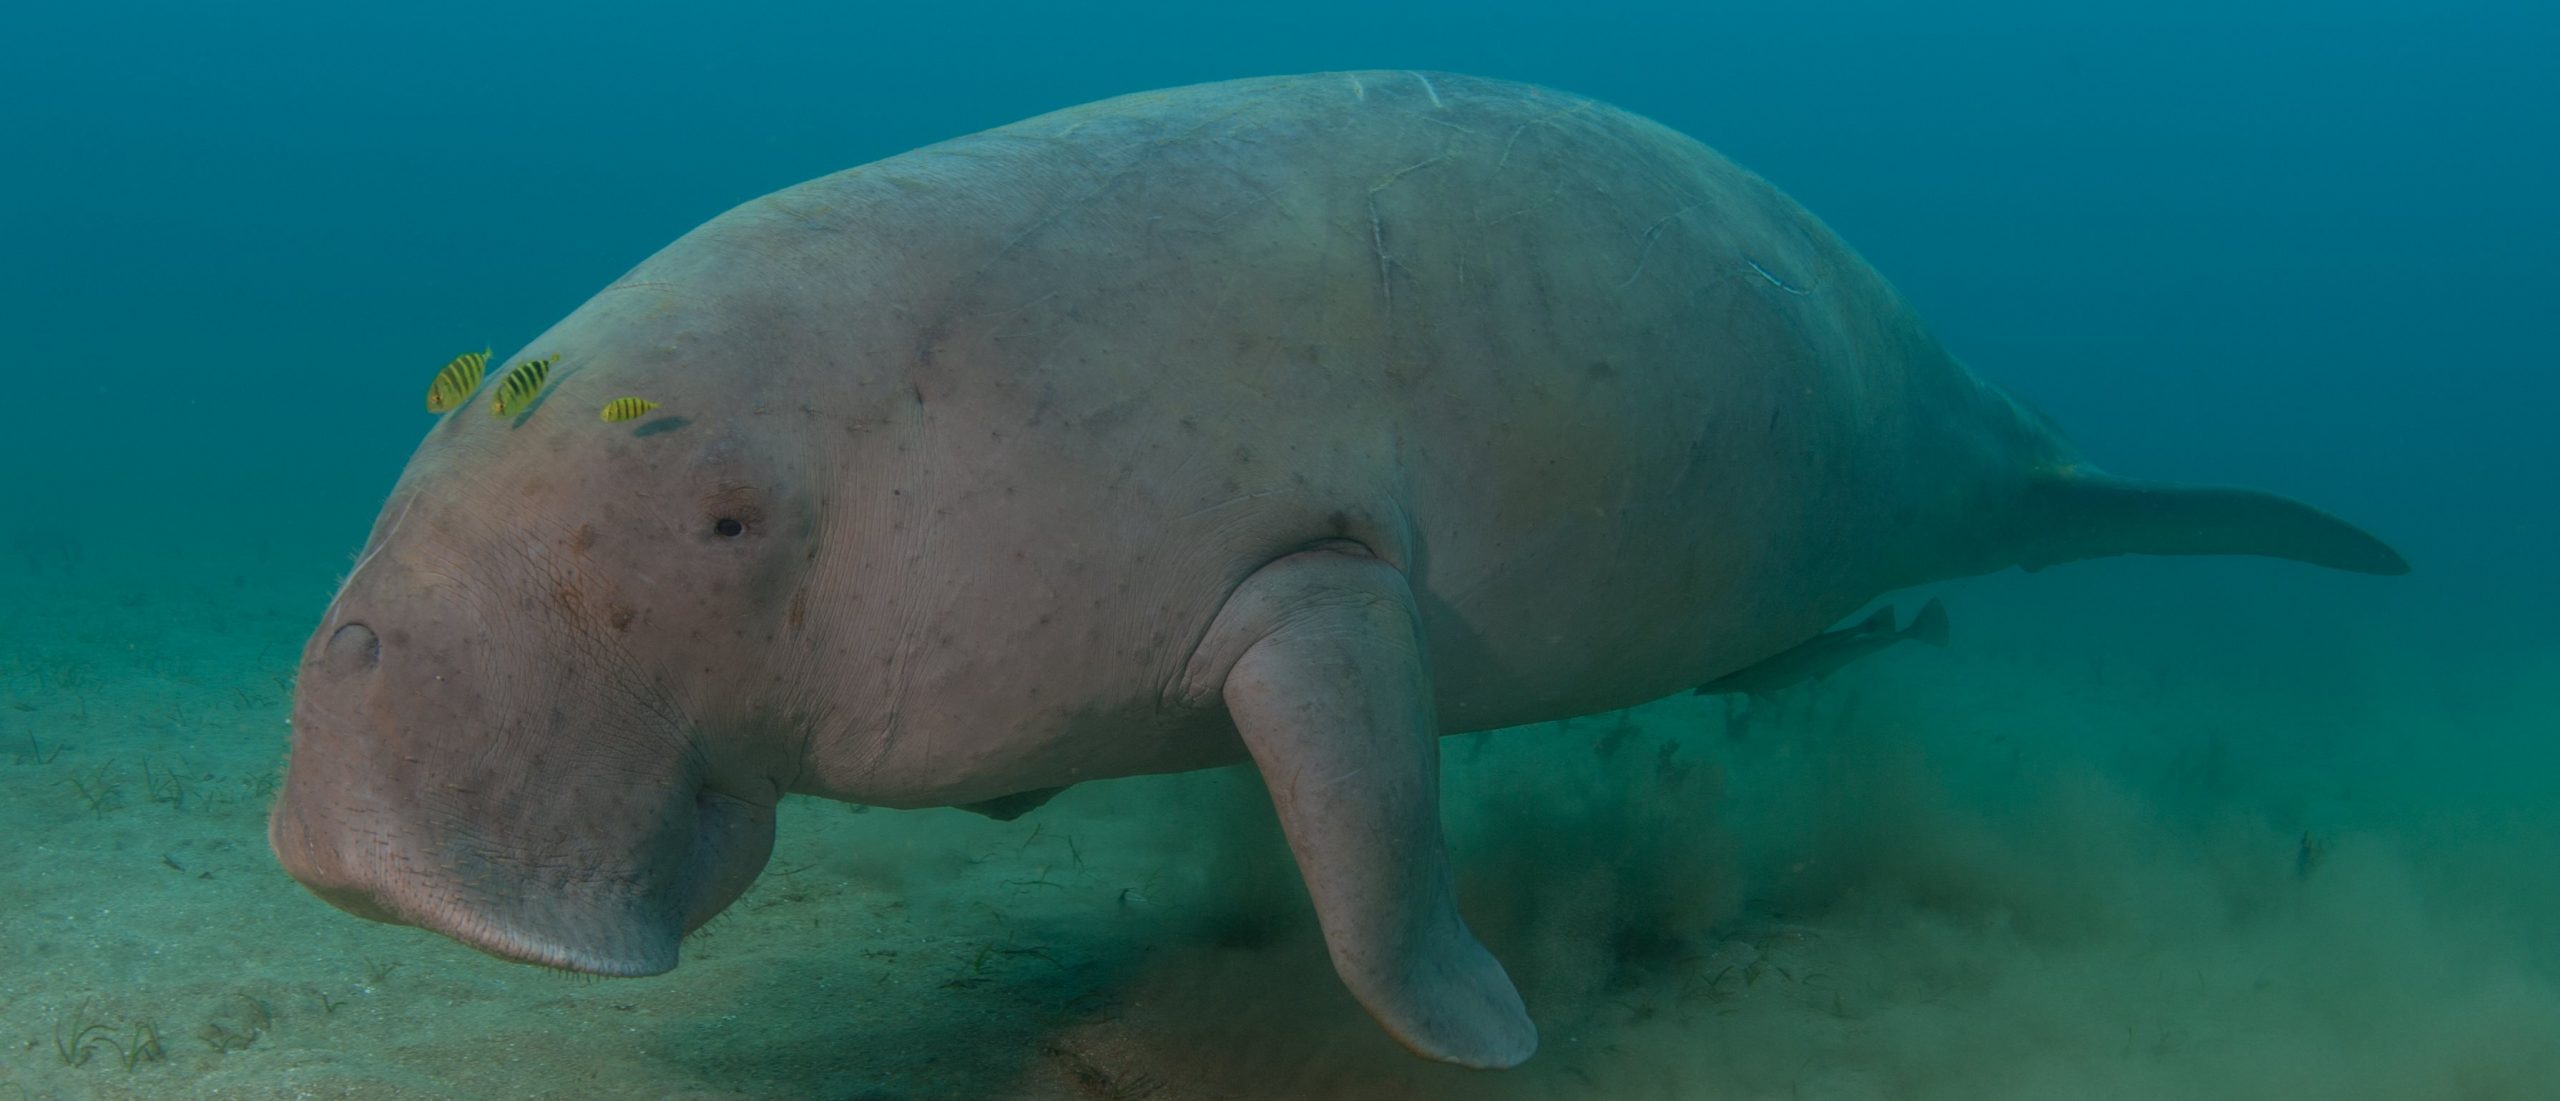 Dugong movements and habitat use in coral reef lagoons